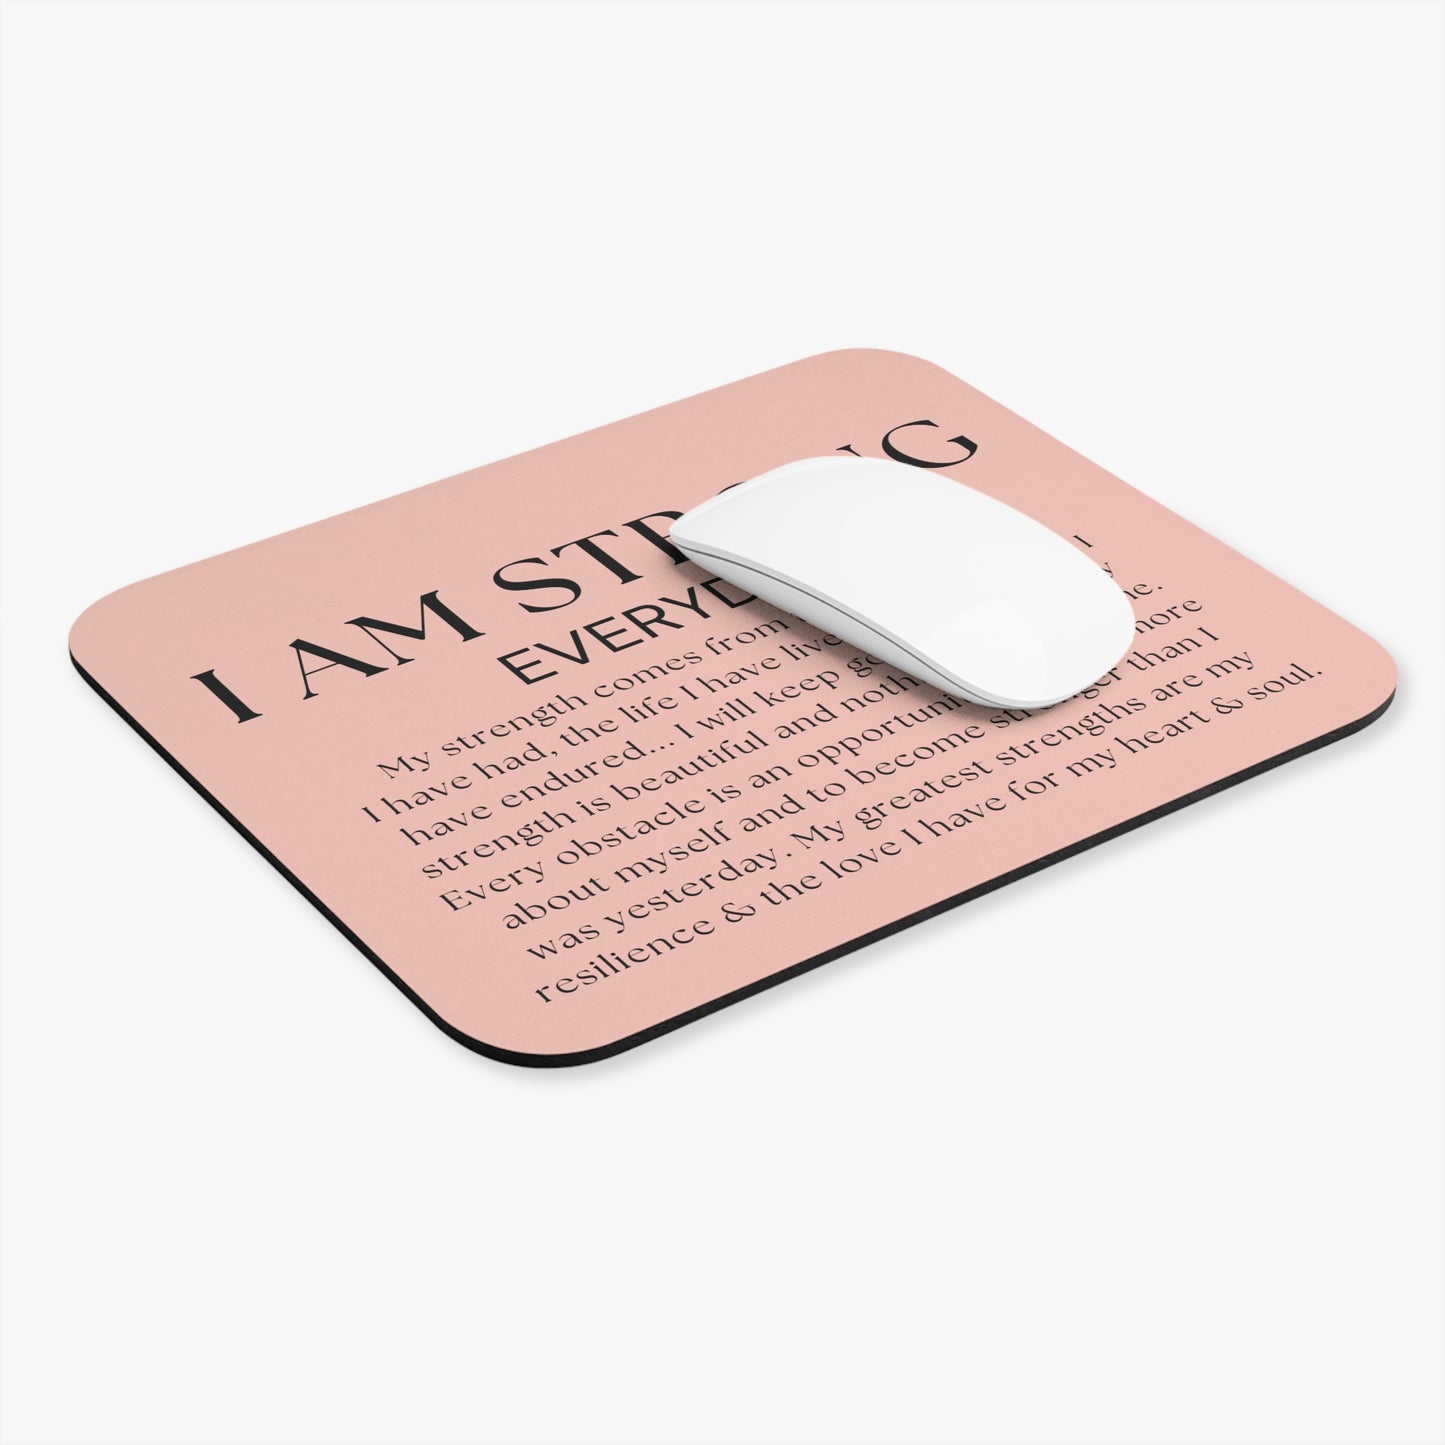 I AM STRONG Mouse Pad